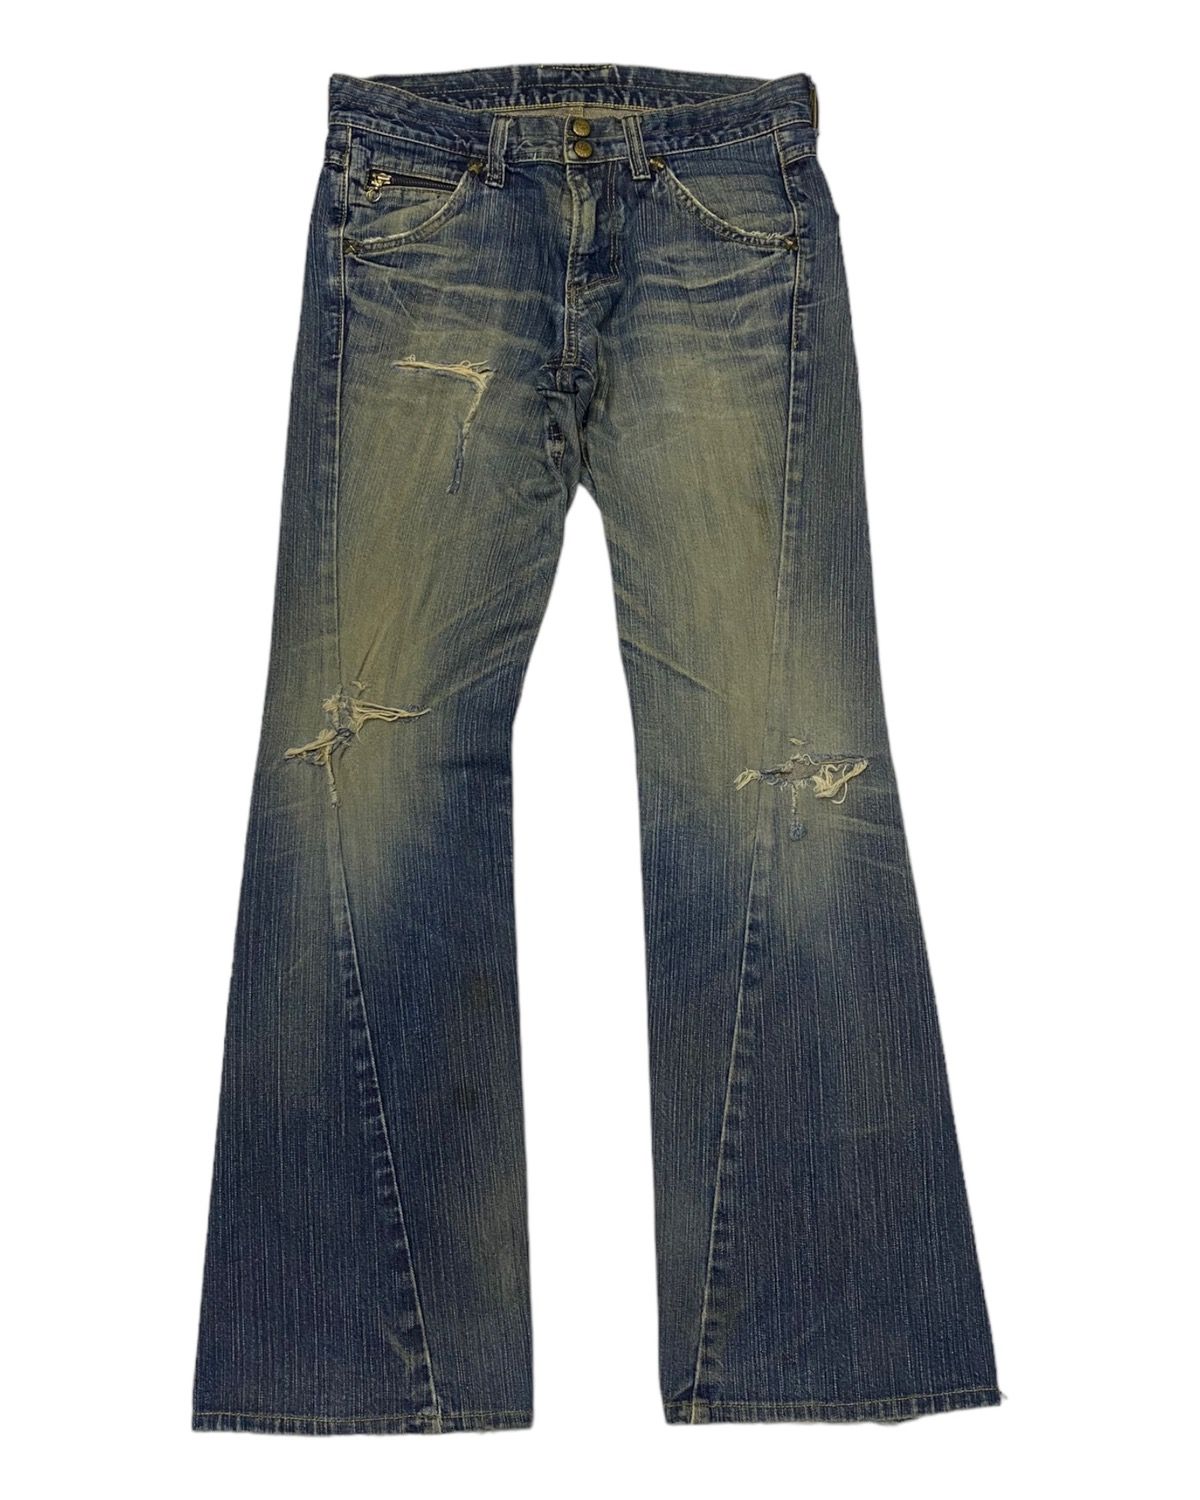 🔥LEE FLARE TWISTED DISTRESSED DENIM JEANS BOOTCUT FLARED - 1